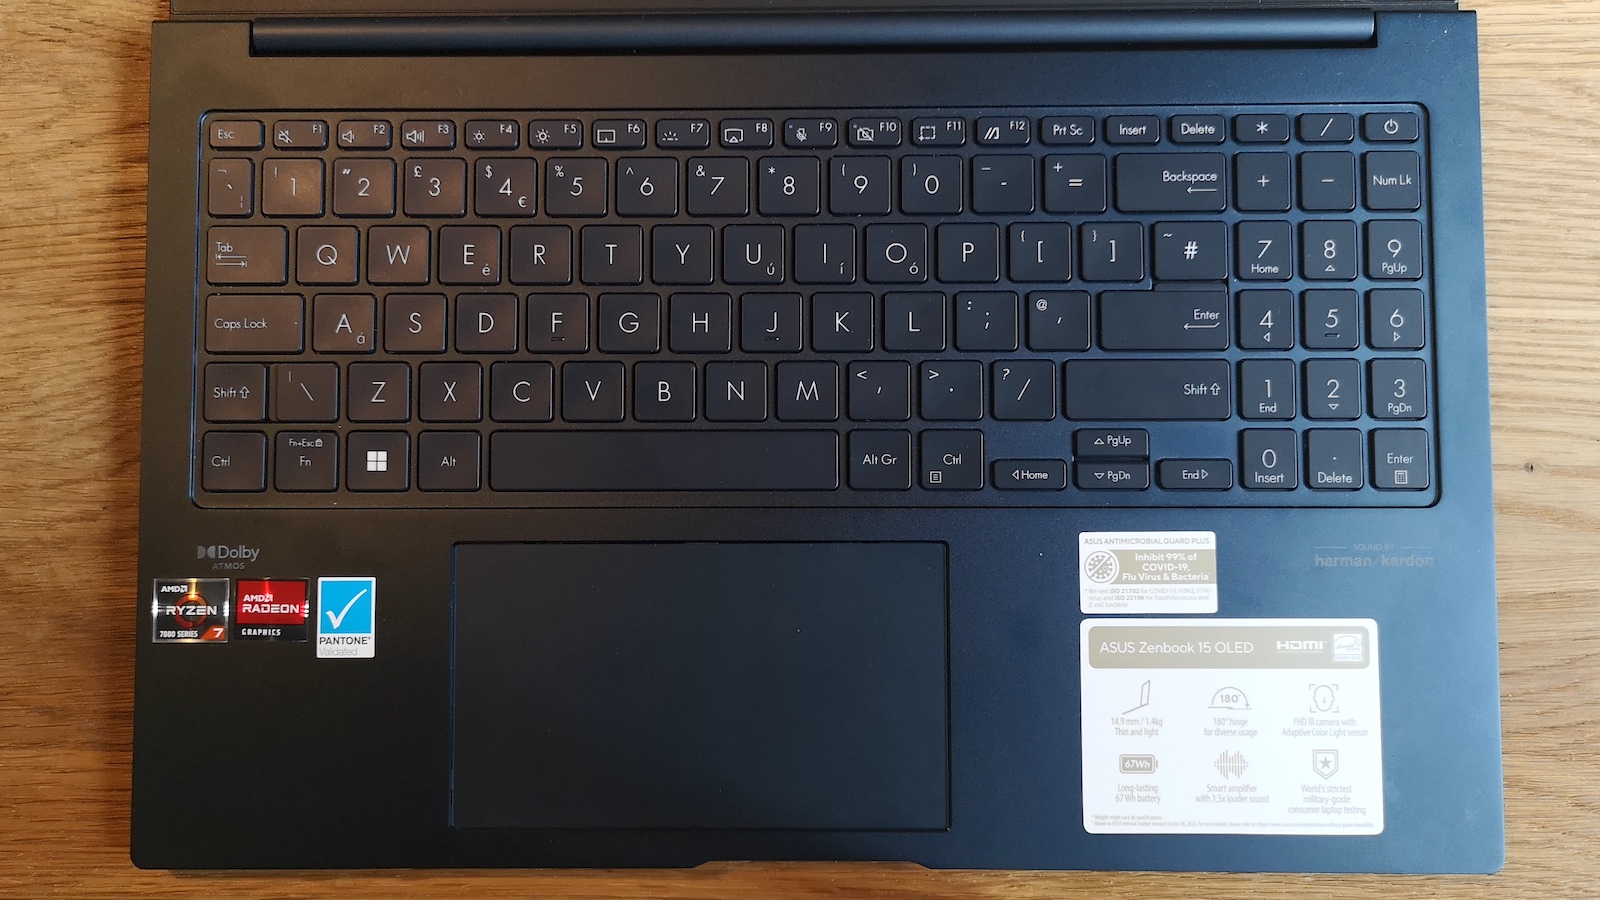 The Asus Zenbook 15 OLED's keyboard